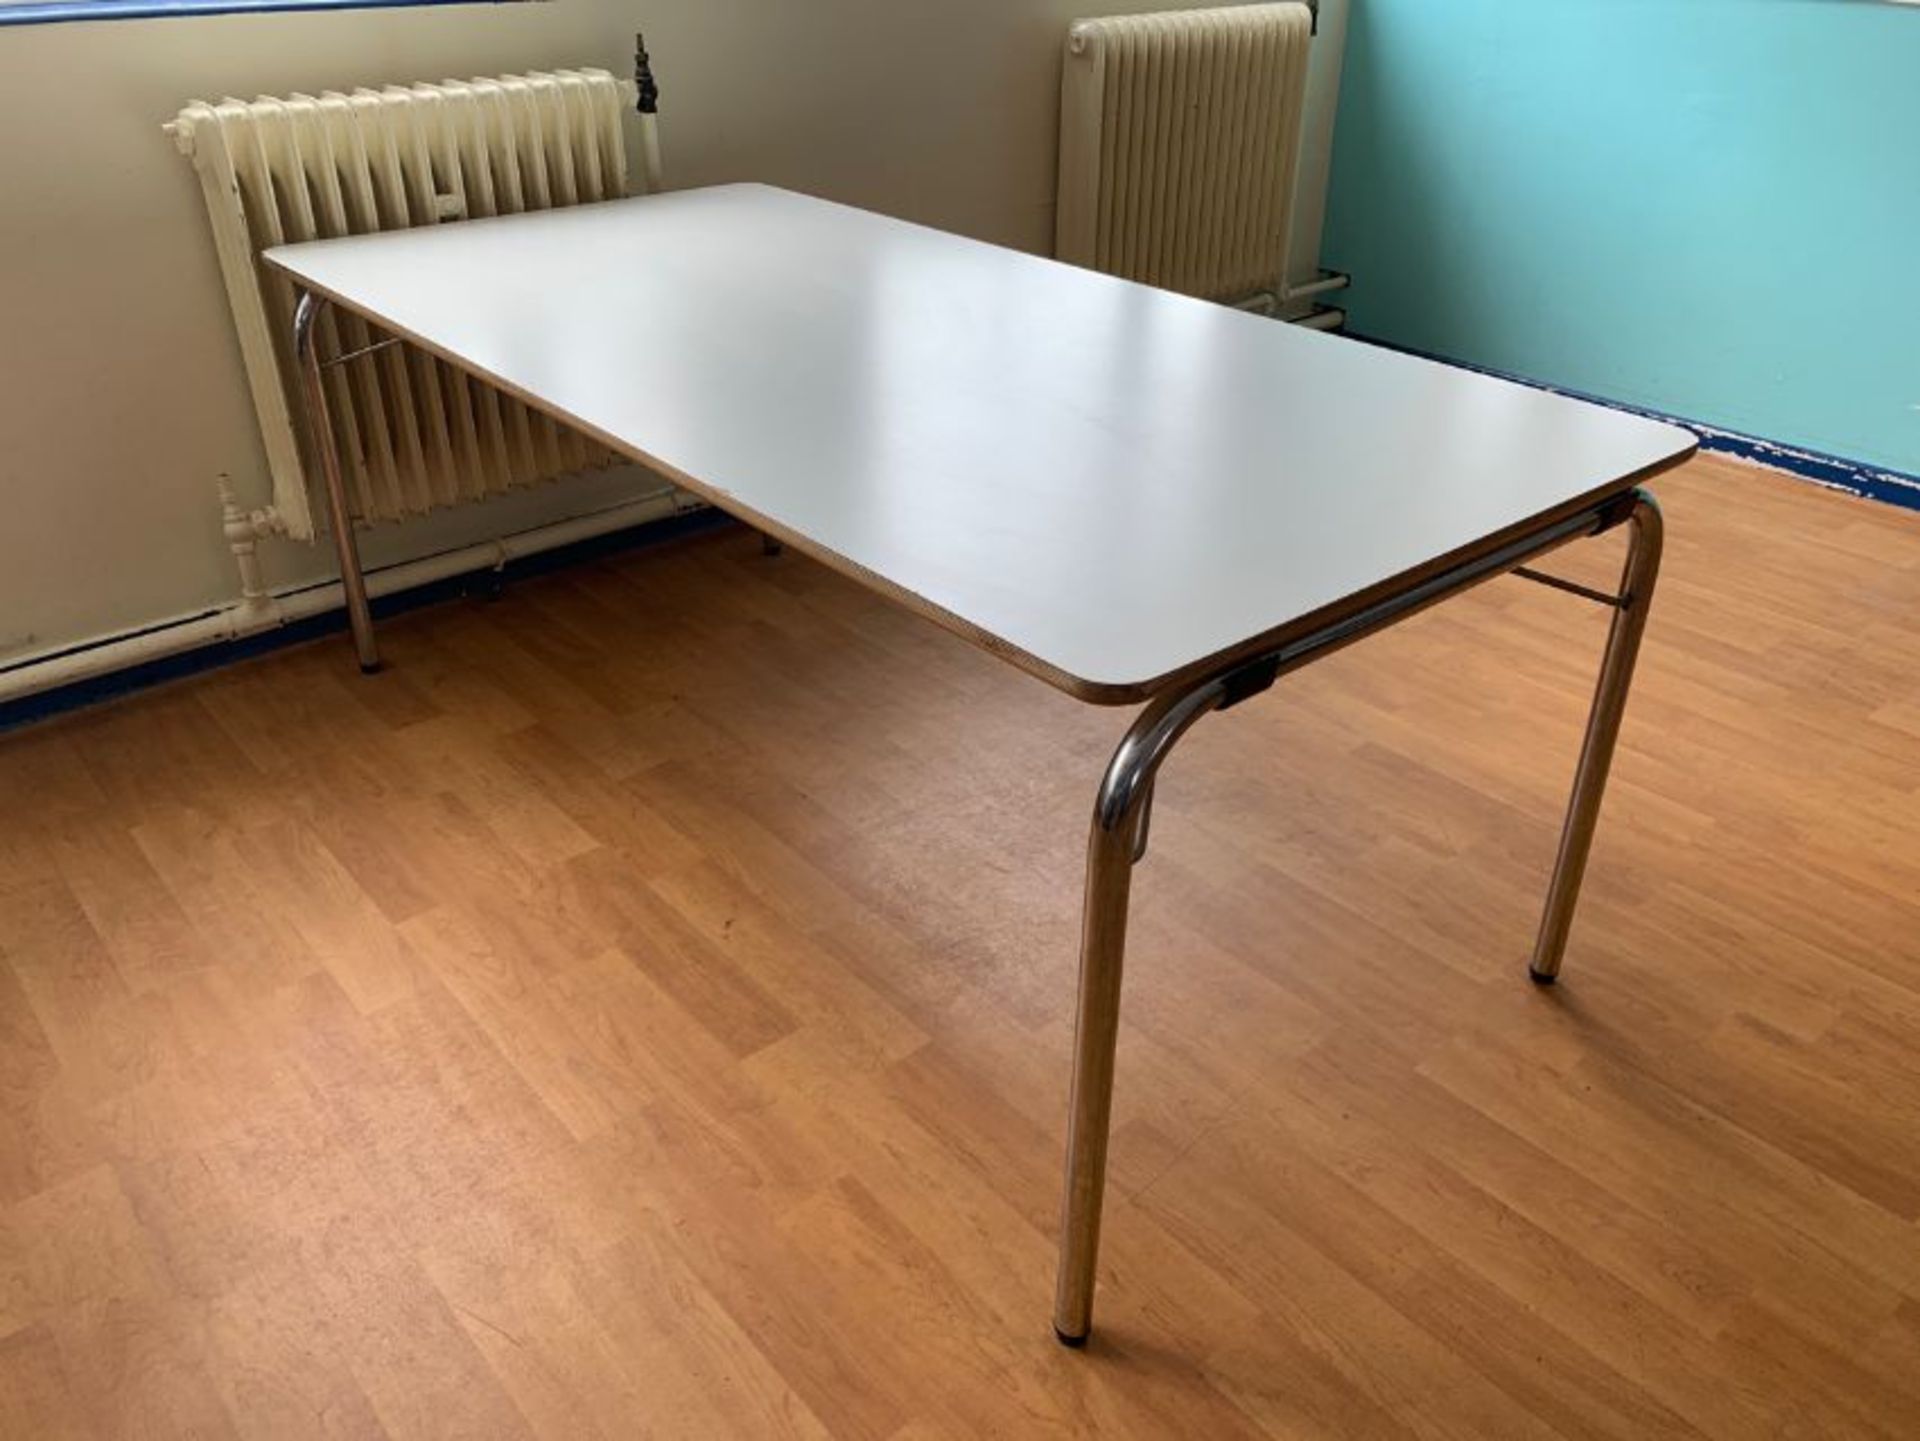 Rectangular Table with Foldable Legs - Image 4 of 7